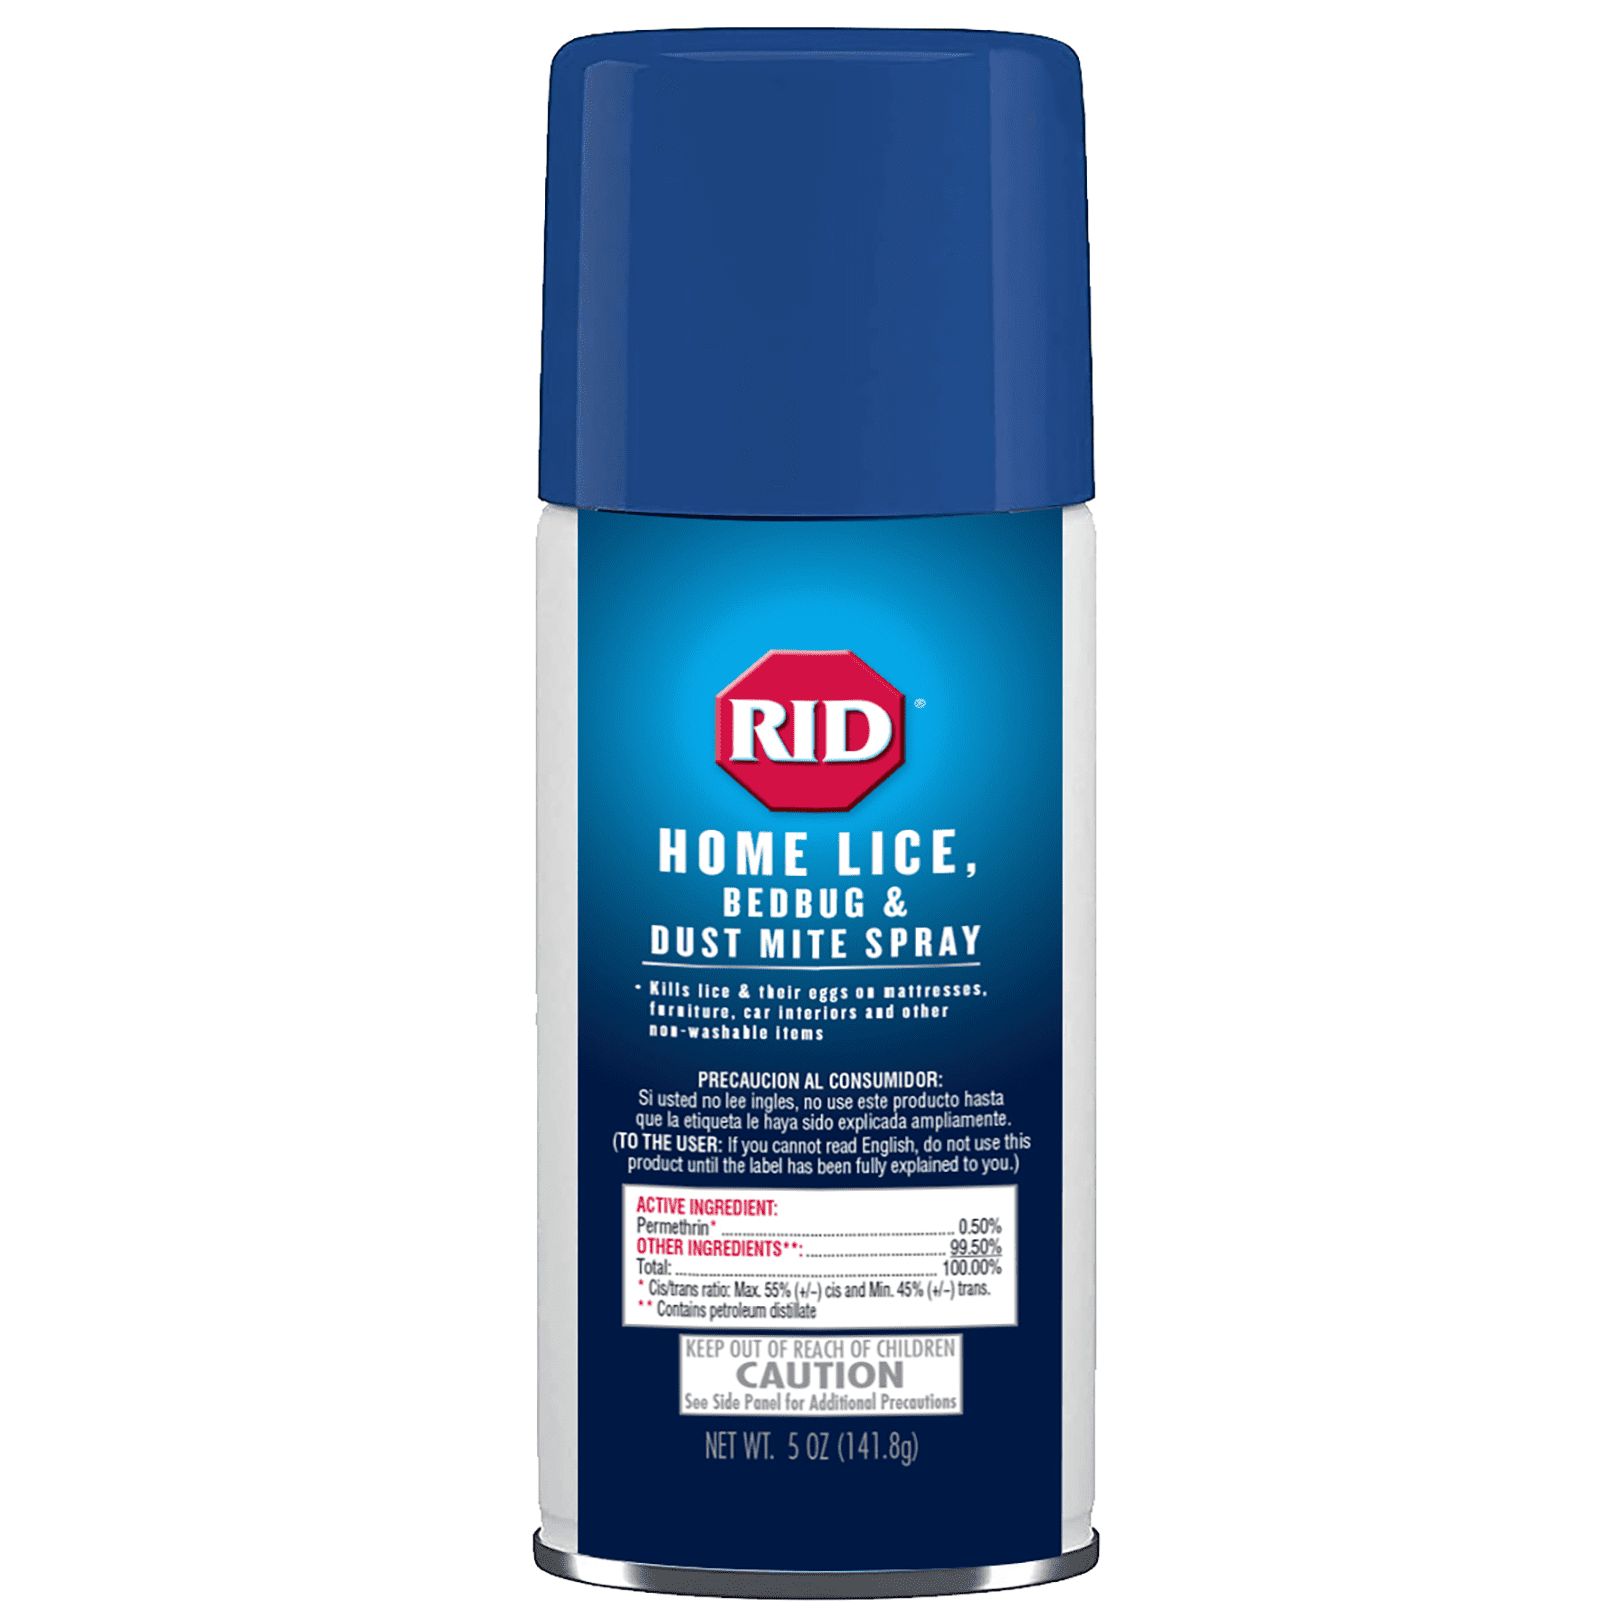 RID Home Lice Treatment Spray for Lice, Bed Bugs & Dust Mites, 5 oz